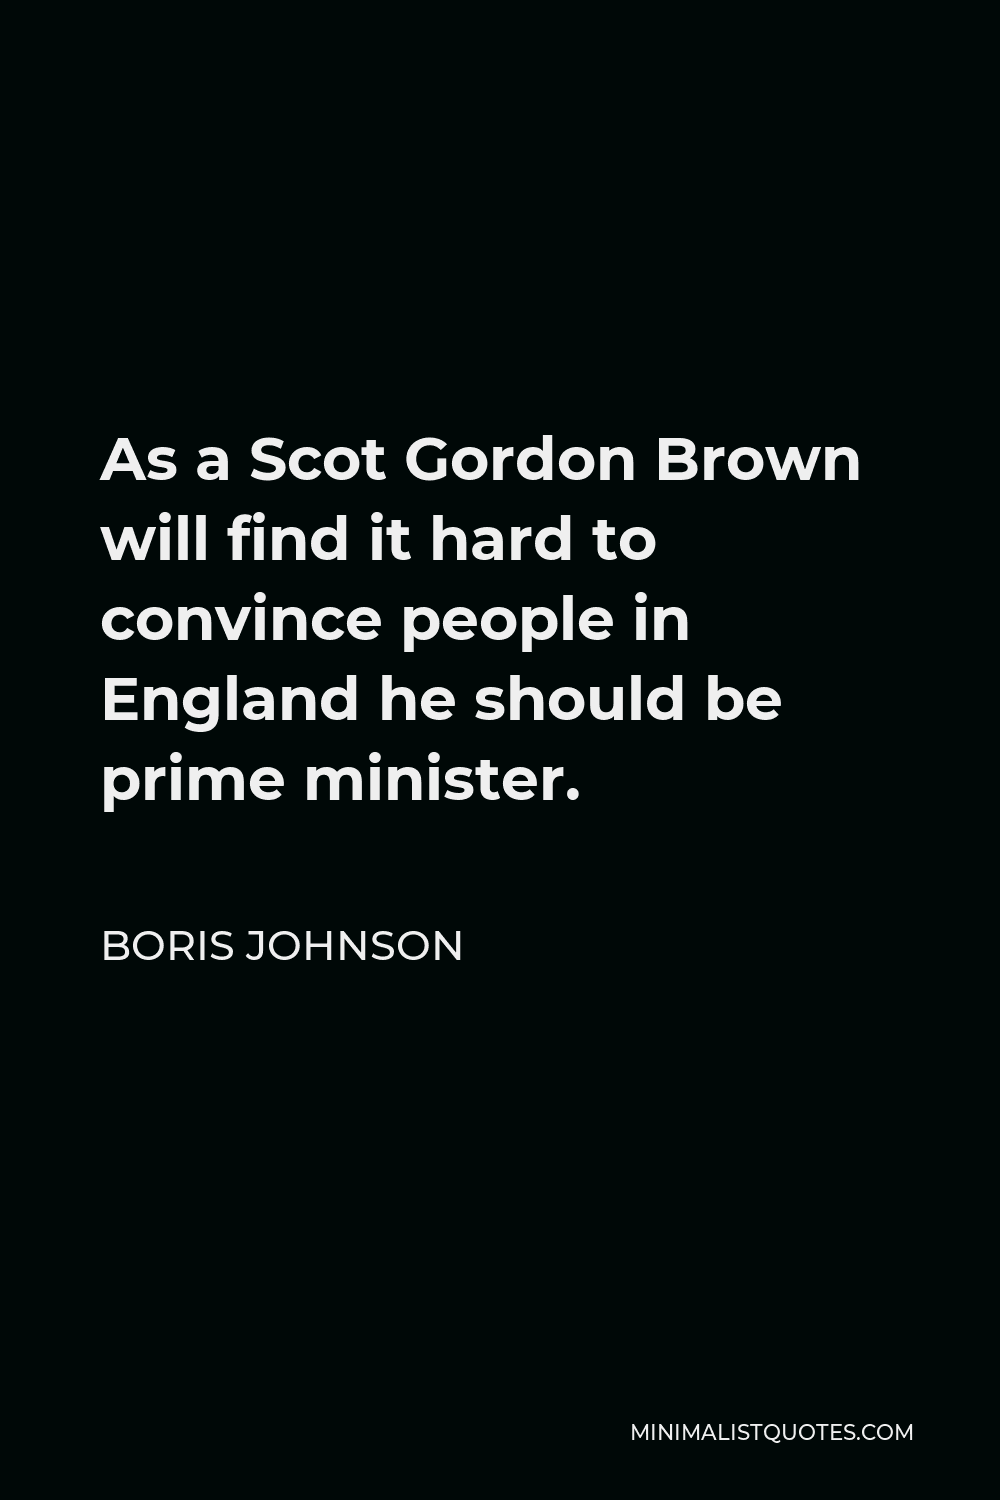 Boris Johnson Quote - As a Scot Gordon Brown will find it hard to convince people in England he should be prime minister.